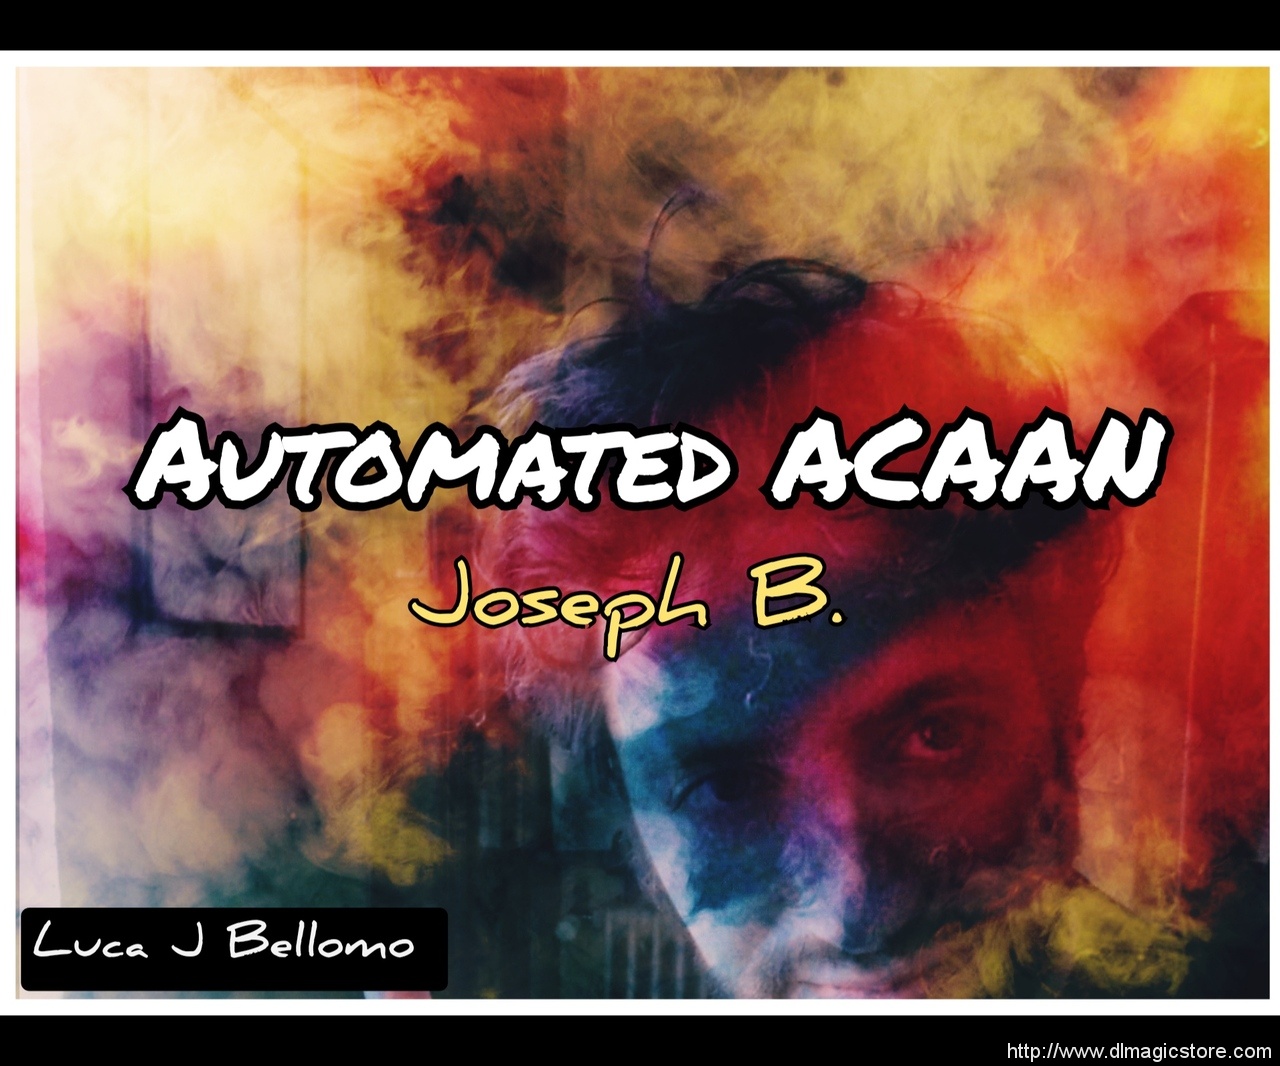 ACAAN AUTOMATED By Joseph B. (Instant Download)